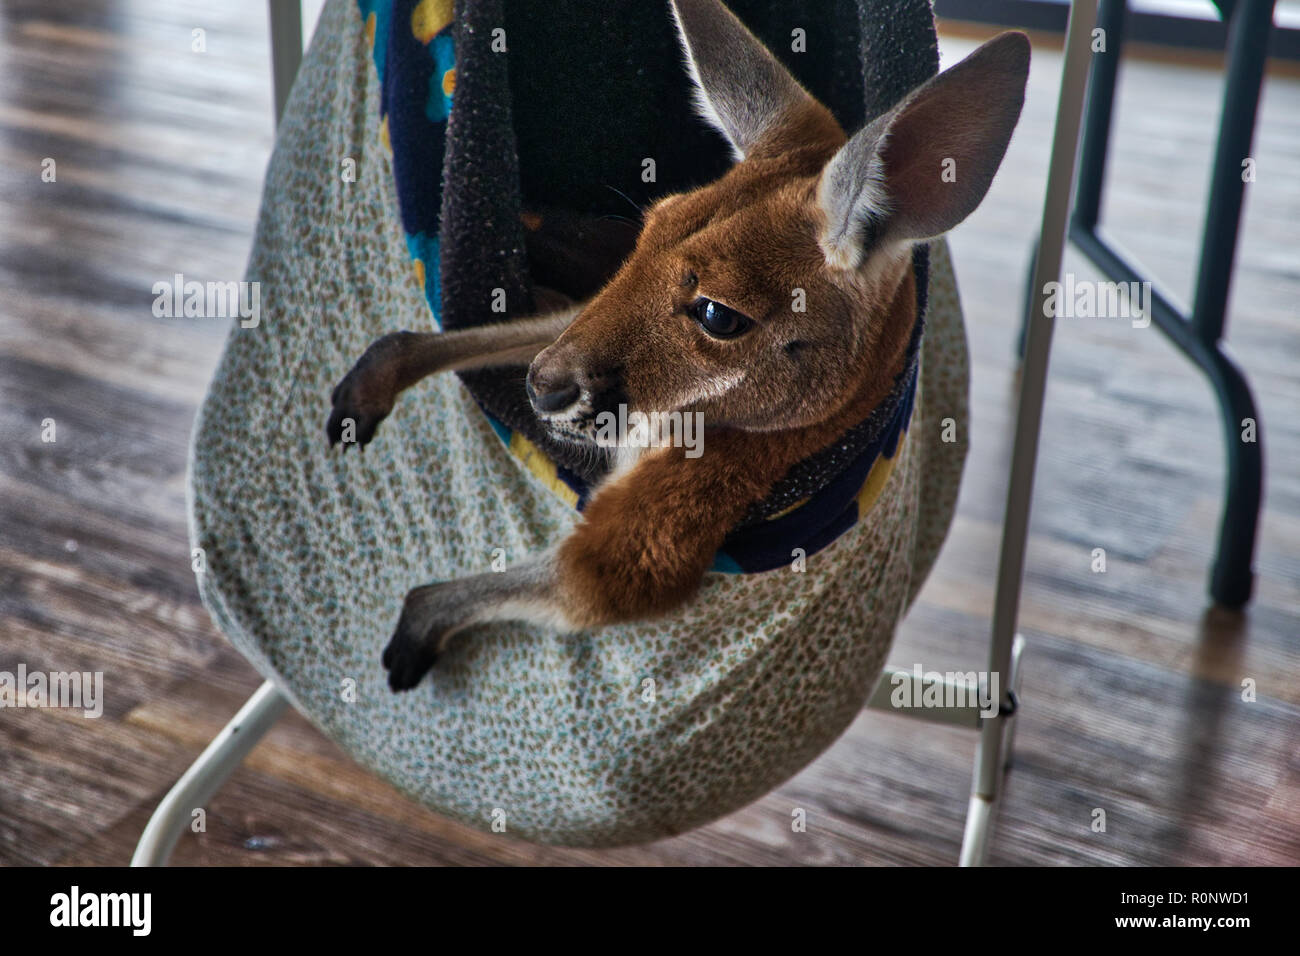 Injured Joey with expressive face - 7 of 8 Stock Photo